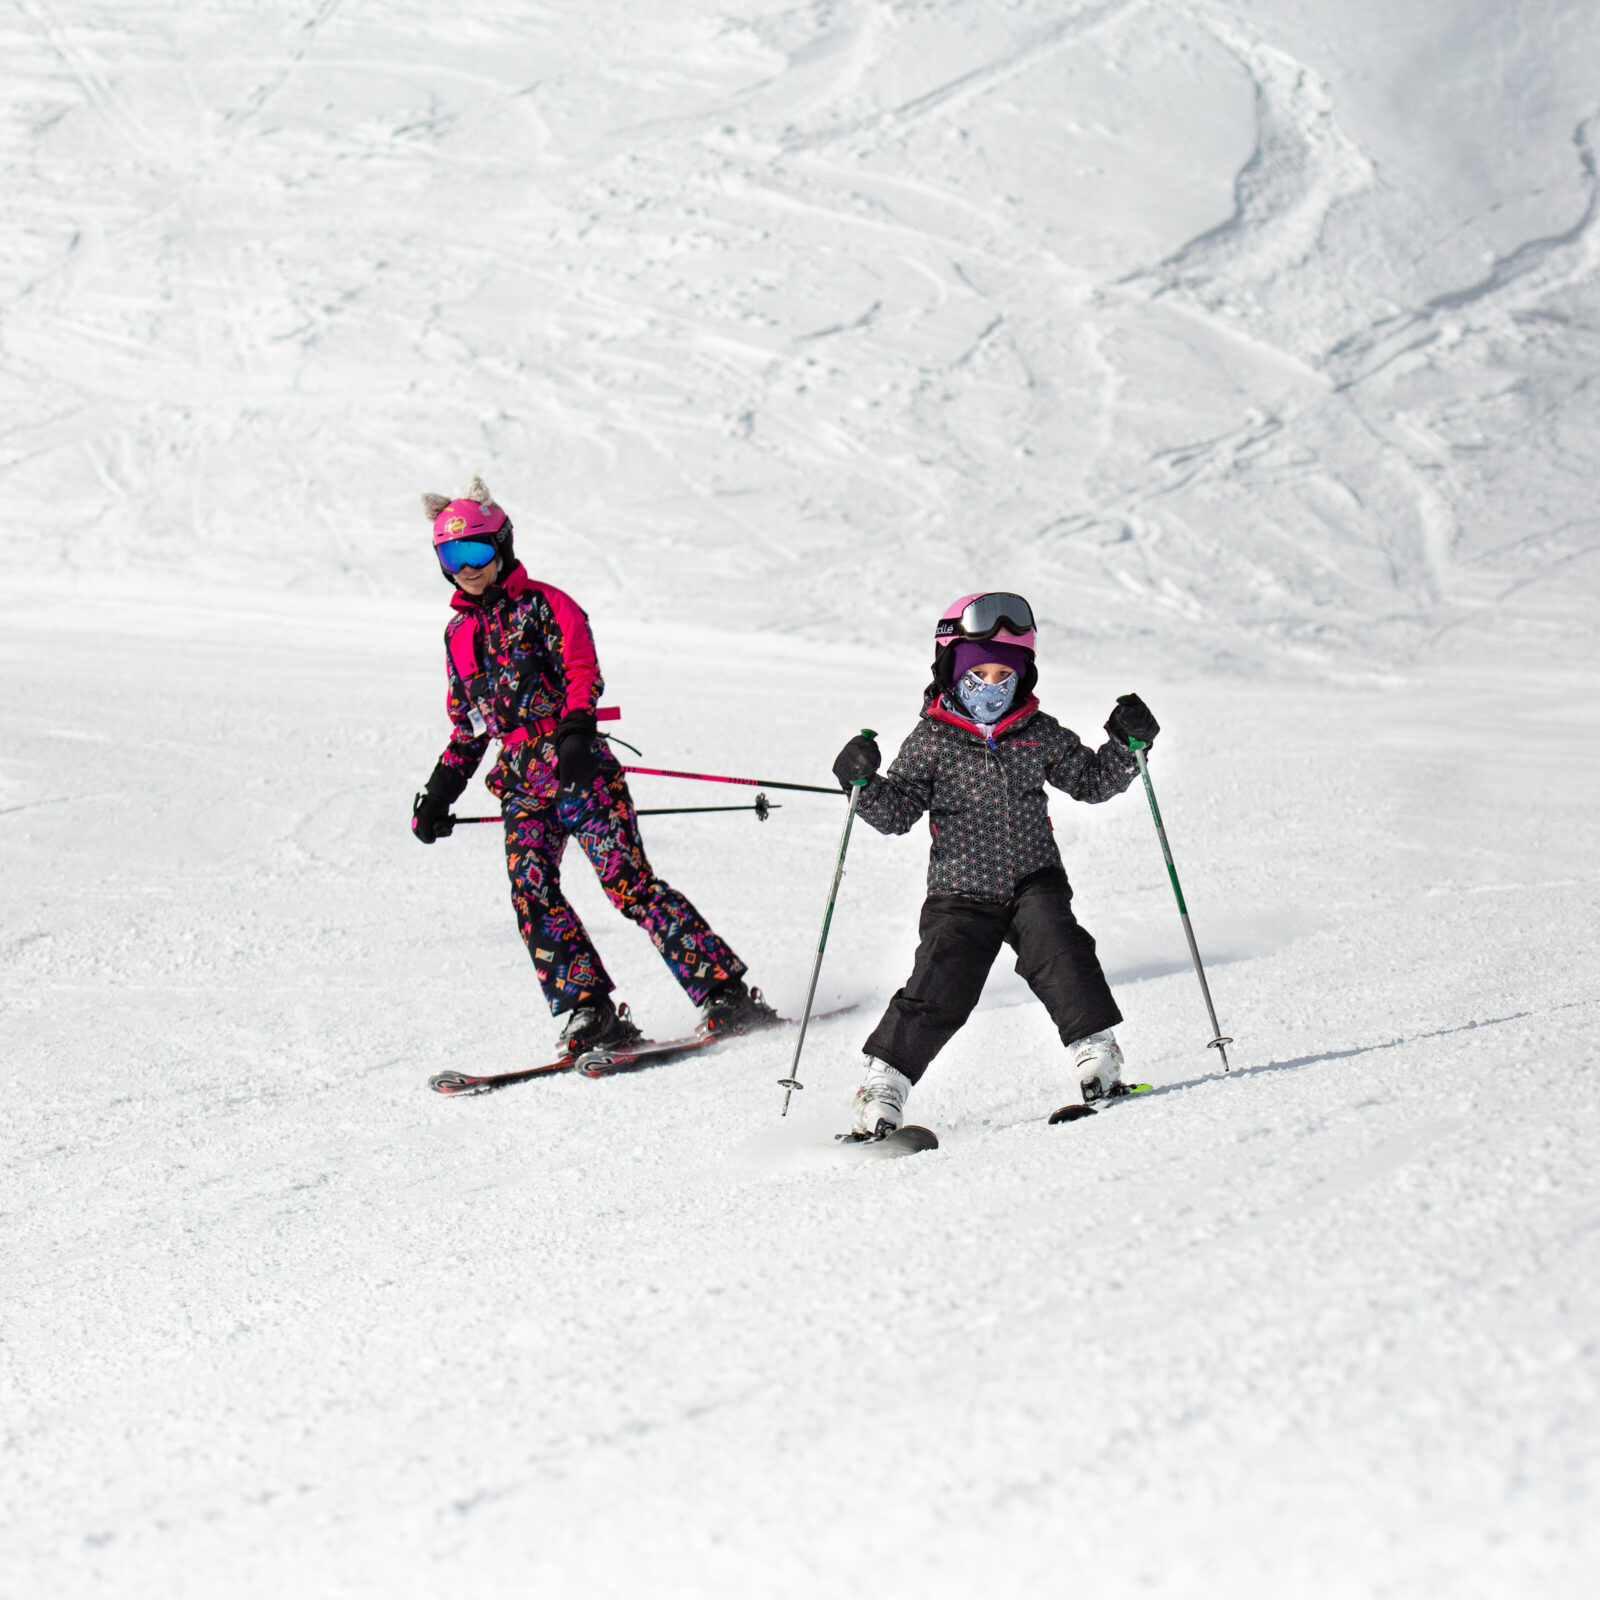 Mother and daughter ski down Lower Bomber Bowl in the sun. Mom is wearing pink and decorative one-piece suite and cat ears on her helmet.